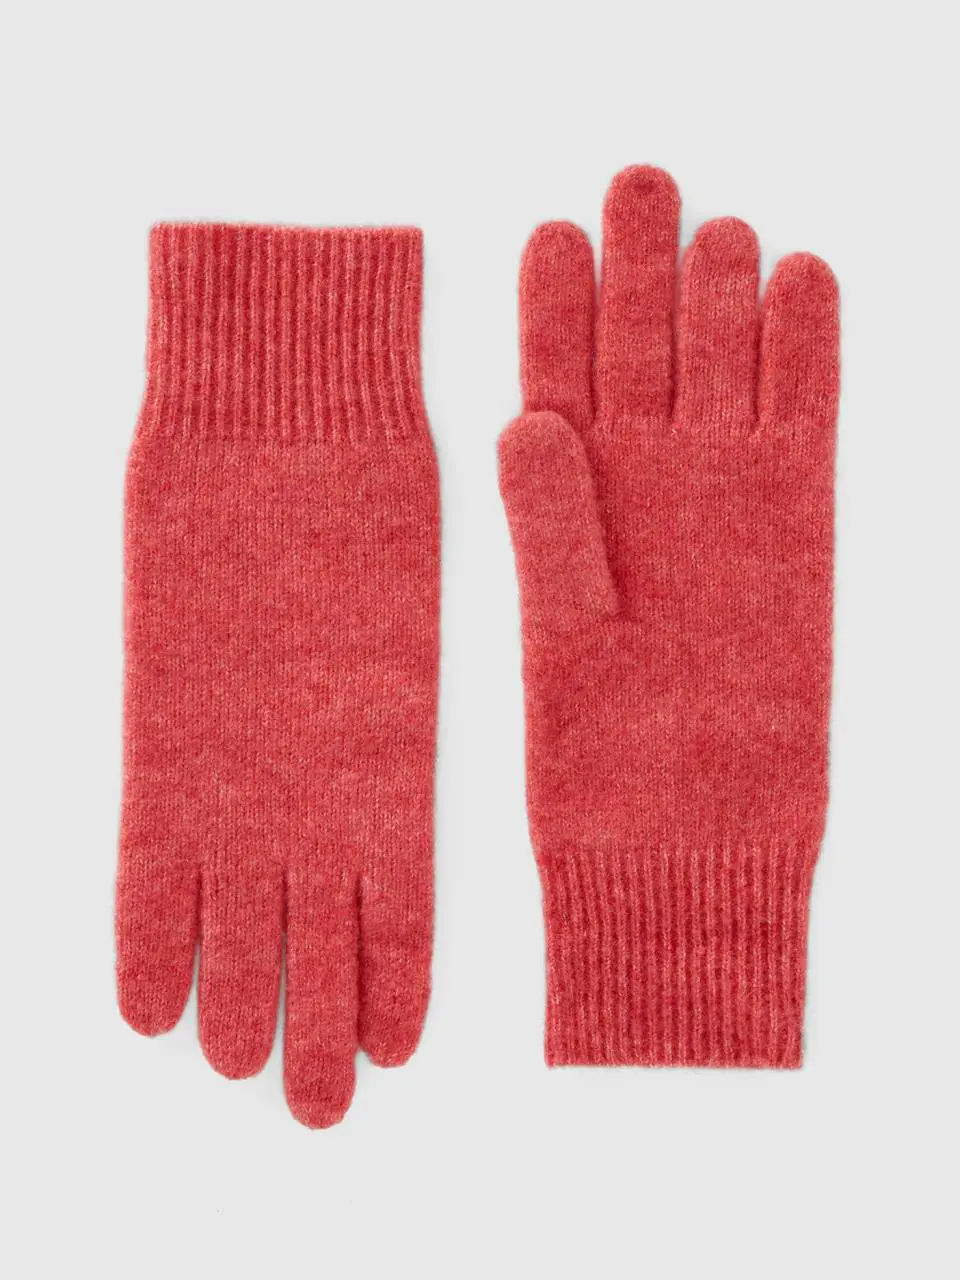 Benetton gloves in recycled yarn. 1